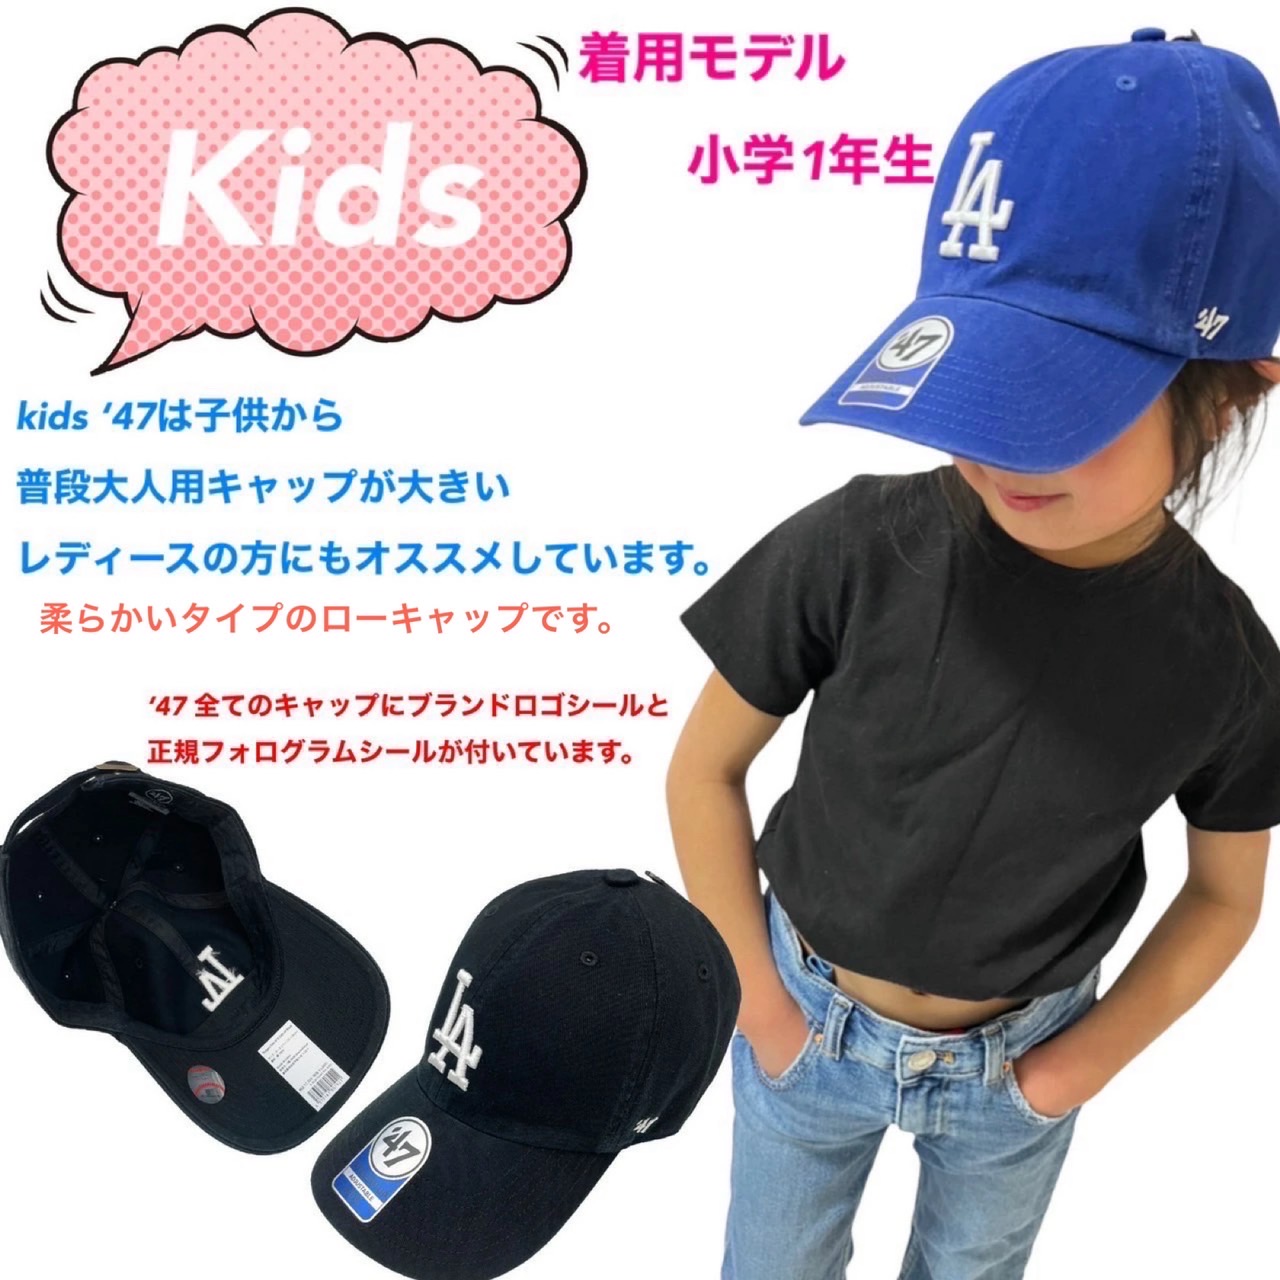 47 four tea seven brand cap doja-sLAyan Keith enzerus Kids hat child man and woman use clean nap embroidery Logo 47BRAND KIDS CLEAN UP